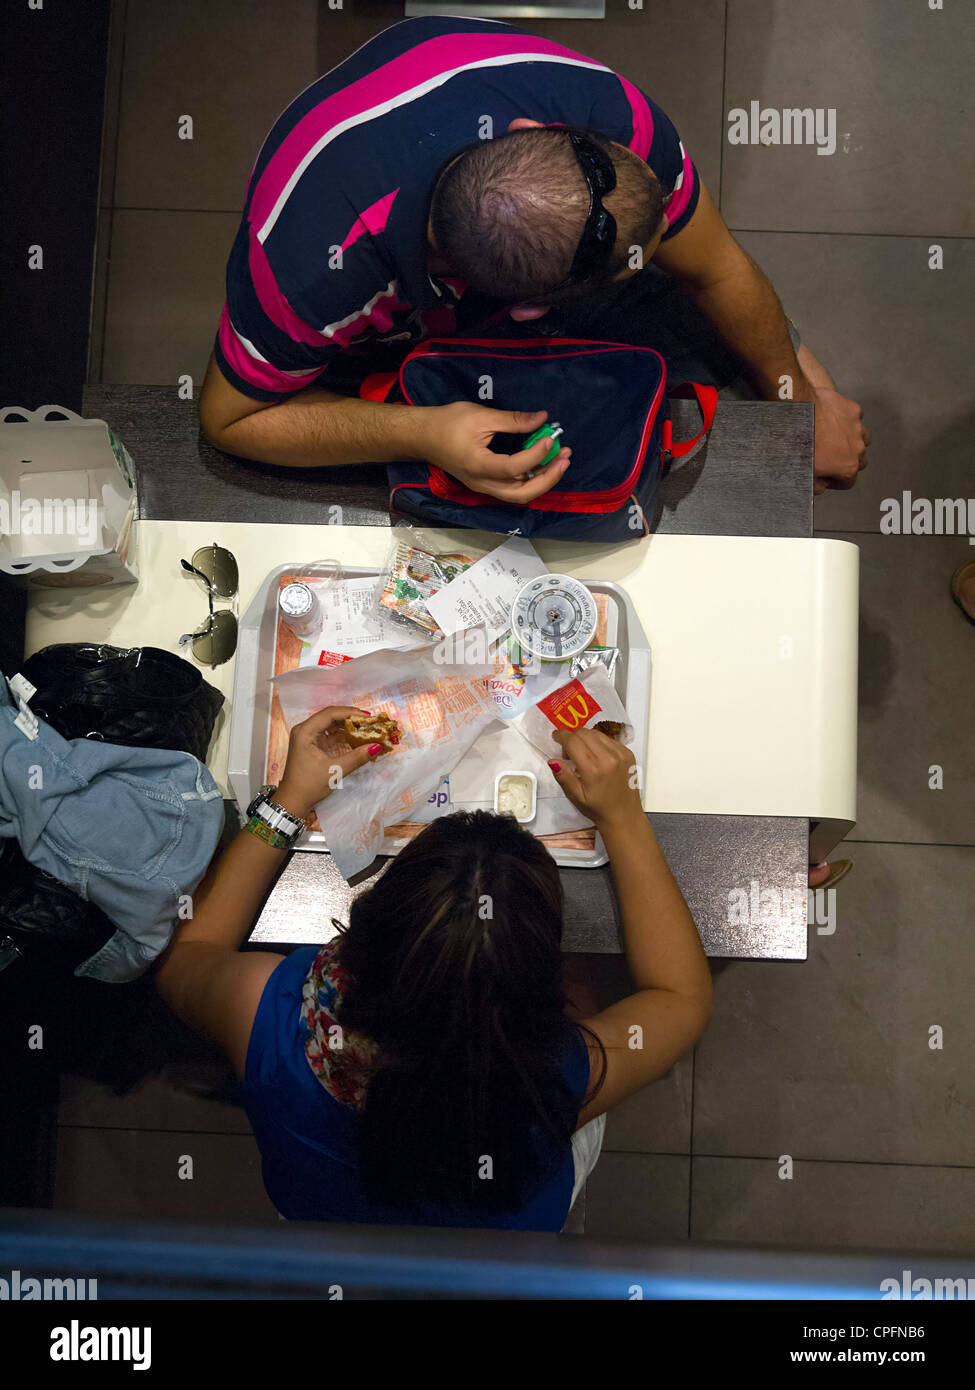 Overhead view of people eating at McDonald's Stock Photo